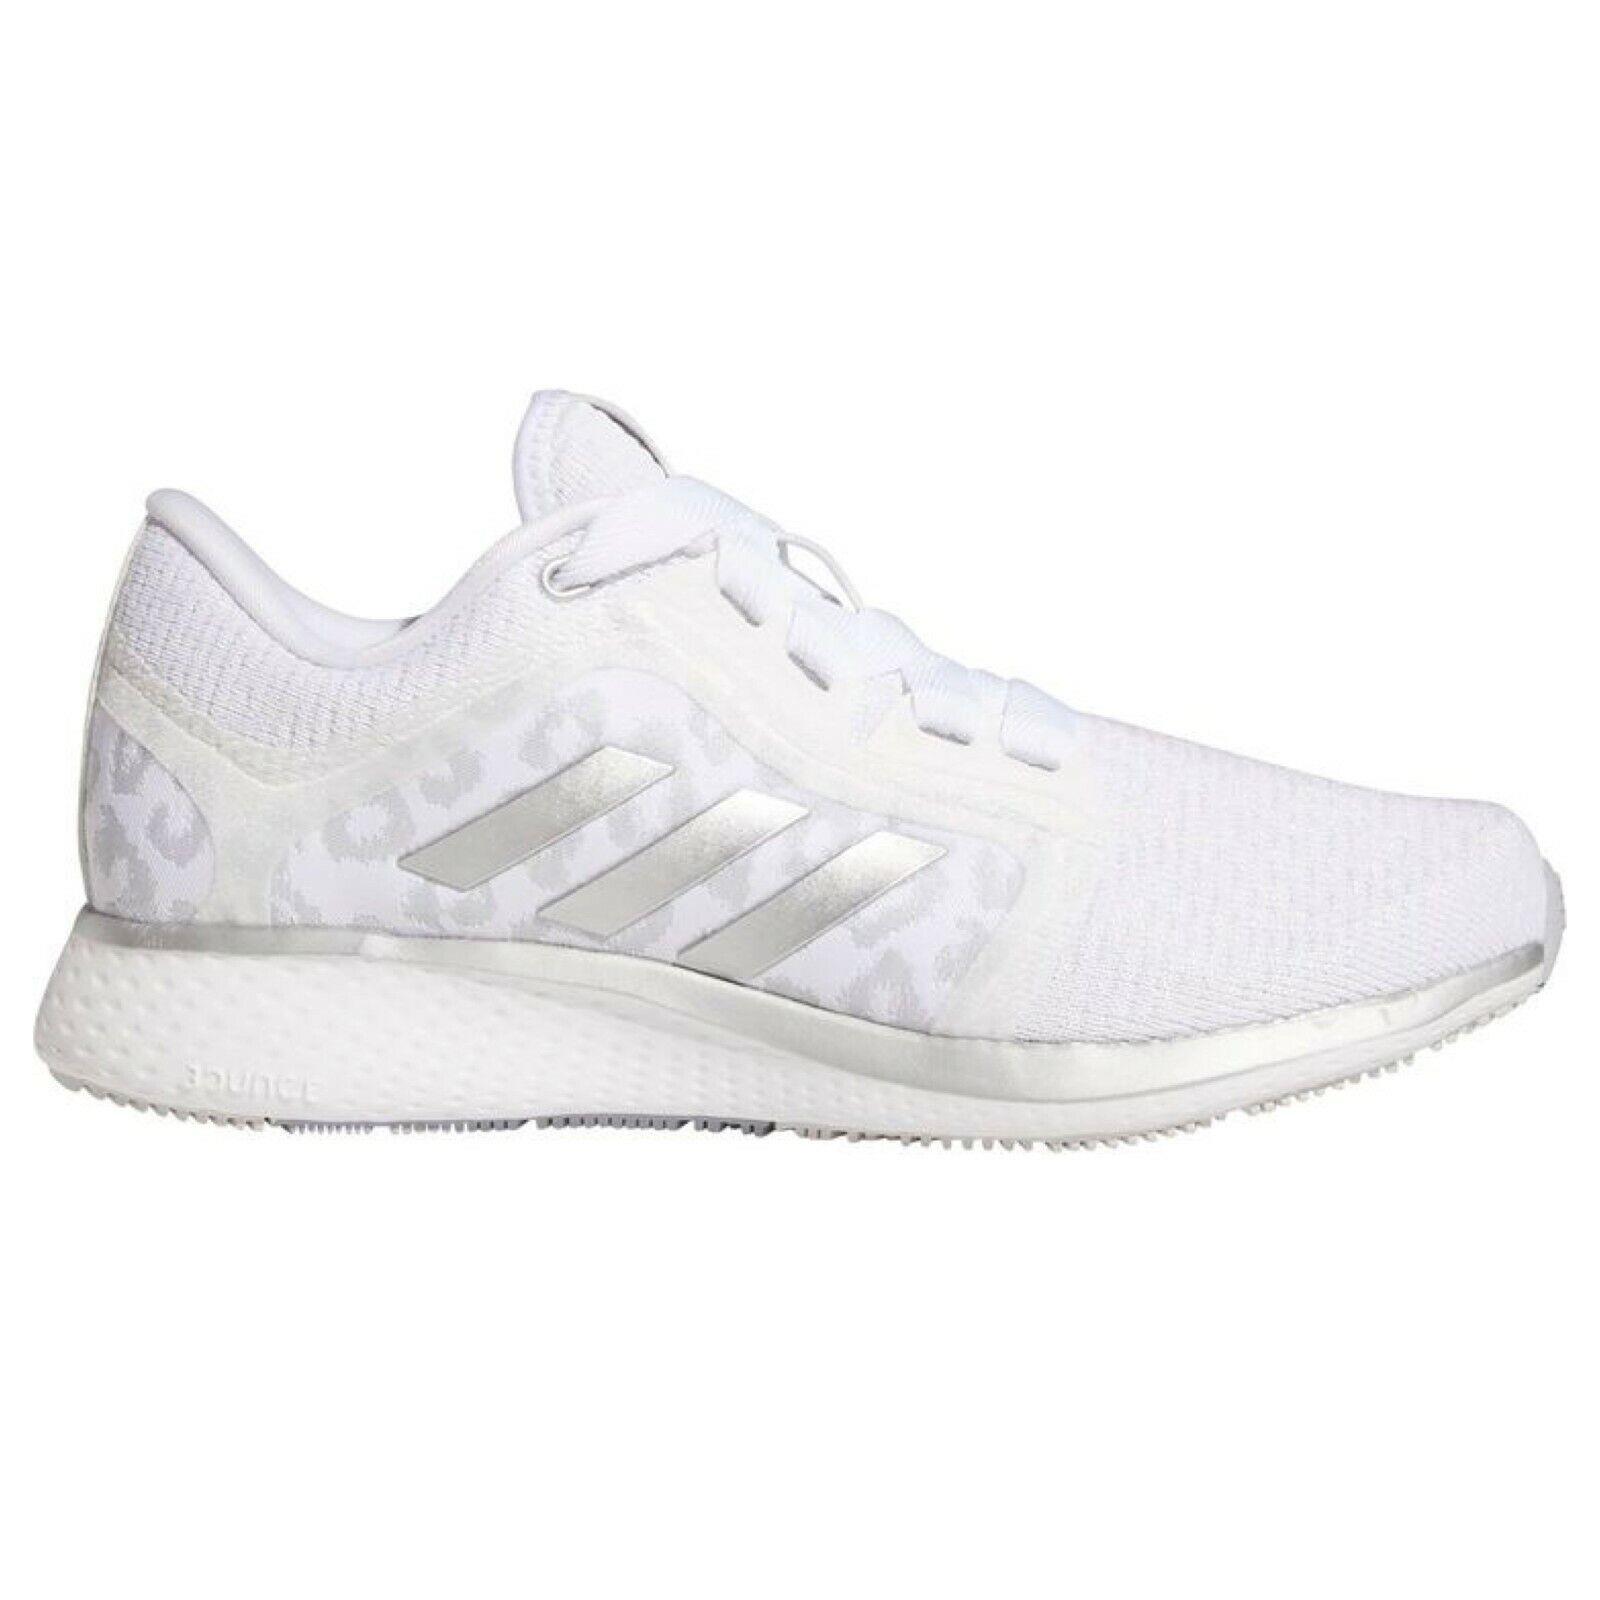 Adidas shoes Edge Lux - White , GREY/WHITE/LEOPARD Manufacturer 0